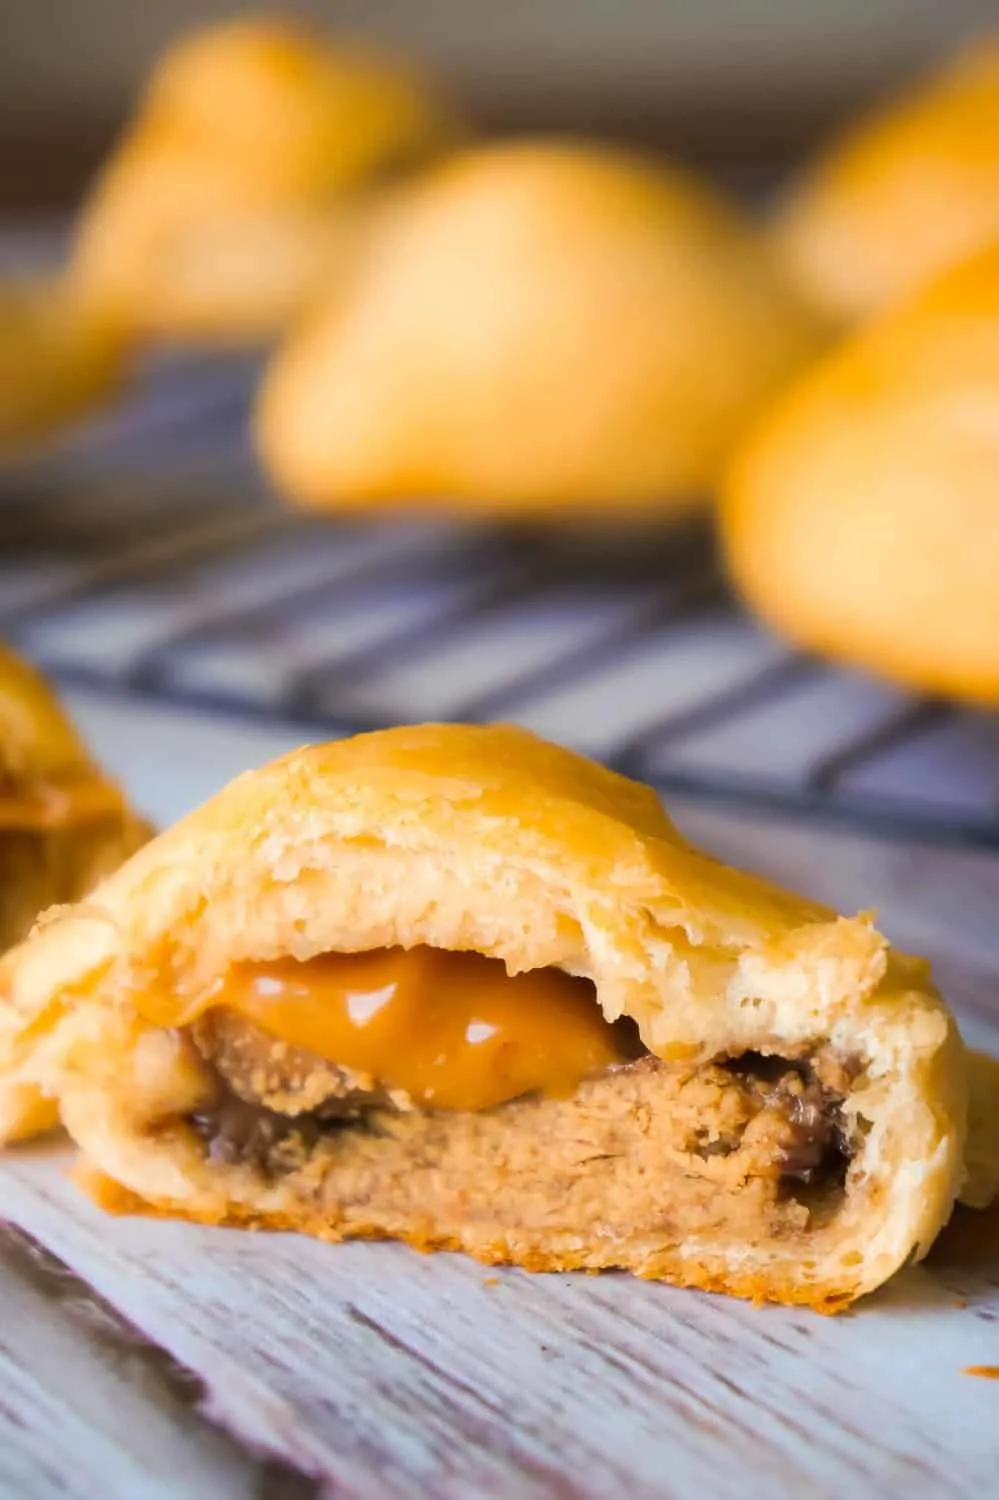 Caramel Peanut Butter Cup Stuffed Crescent Rolls are an easy three ingredient dessert recipe. These Pillsbury crescent rolls are filled with Reese's Peanut Butter Cups and Kraft Caramels.